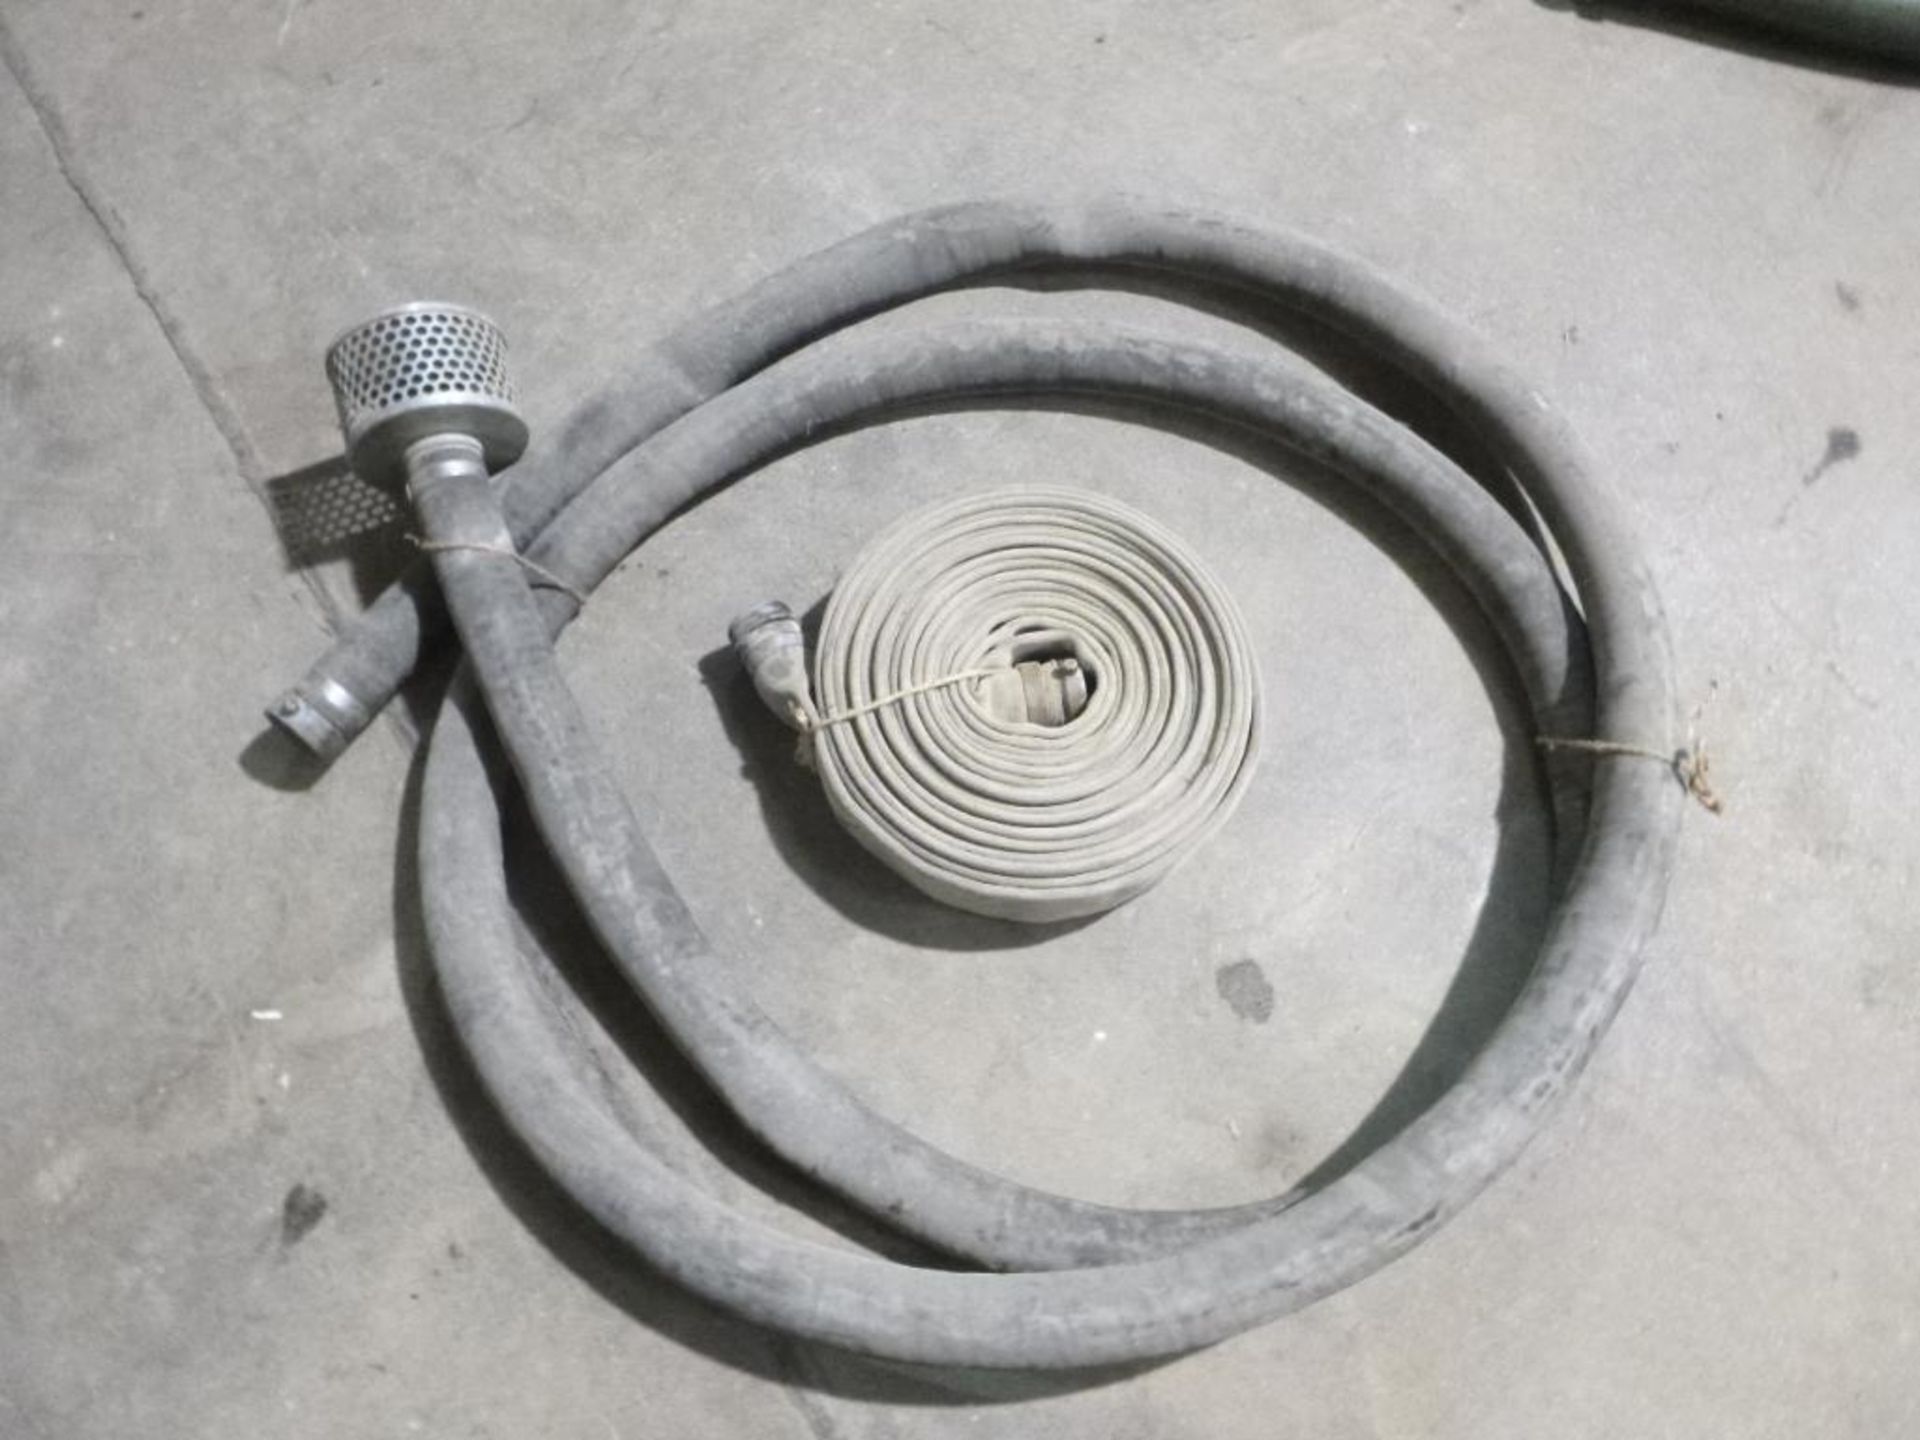 LOT: (1) 2 in. Intake Hose, (1) 2 in. Discharge Hose